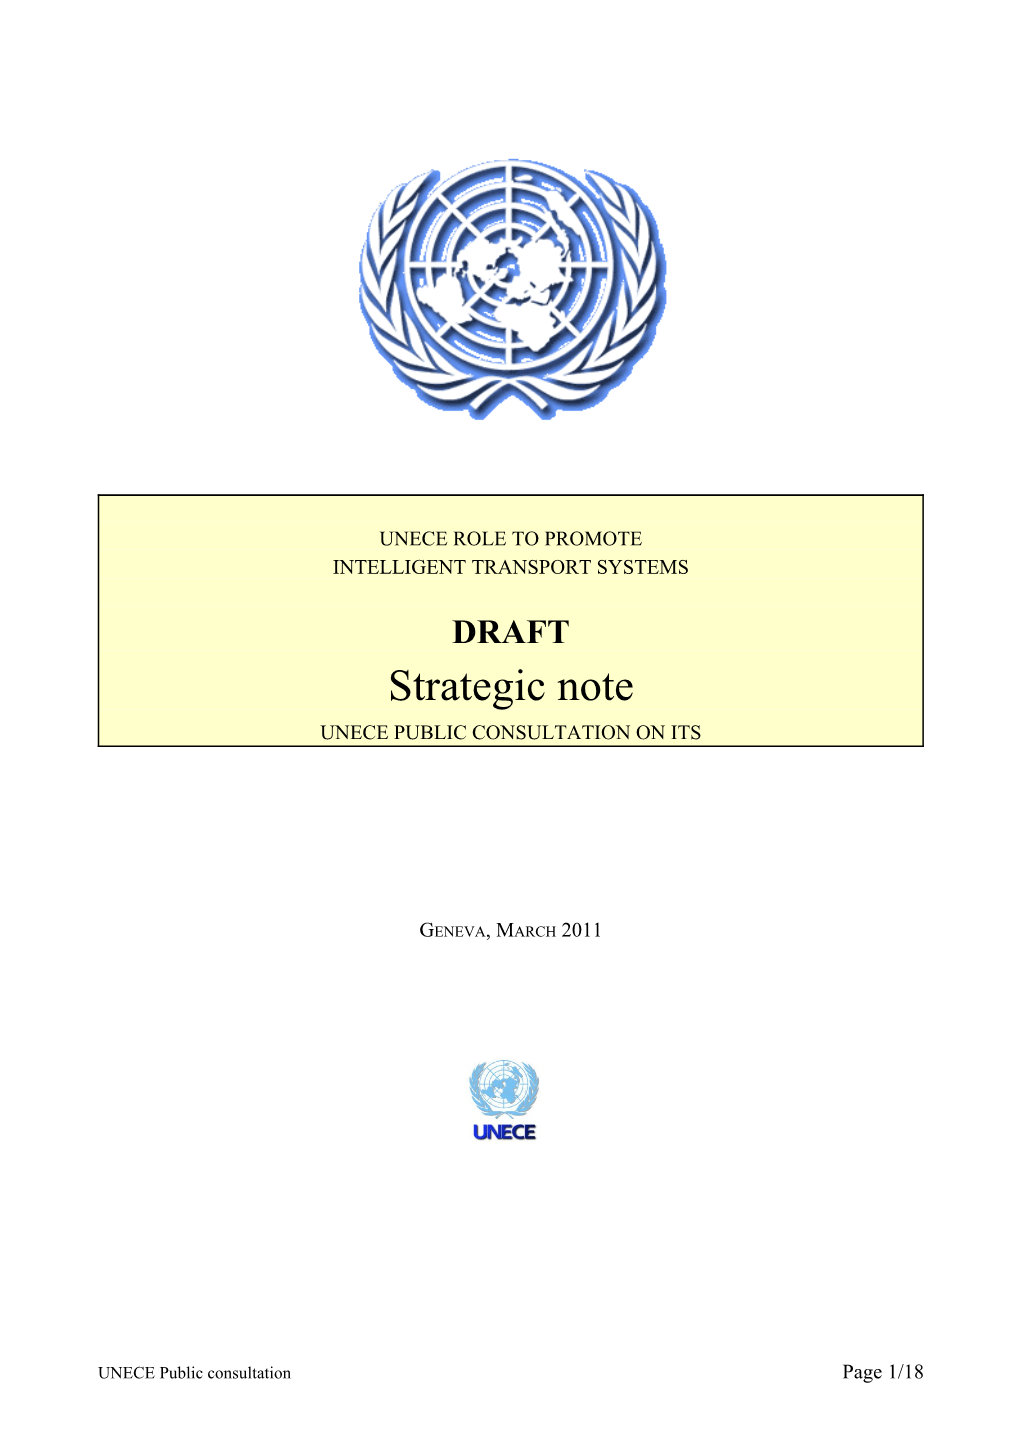 Put Here a Letter from Unece Launching the Public Enquiry Concerning the Roadmap On